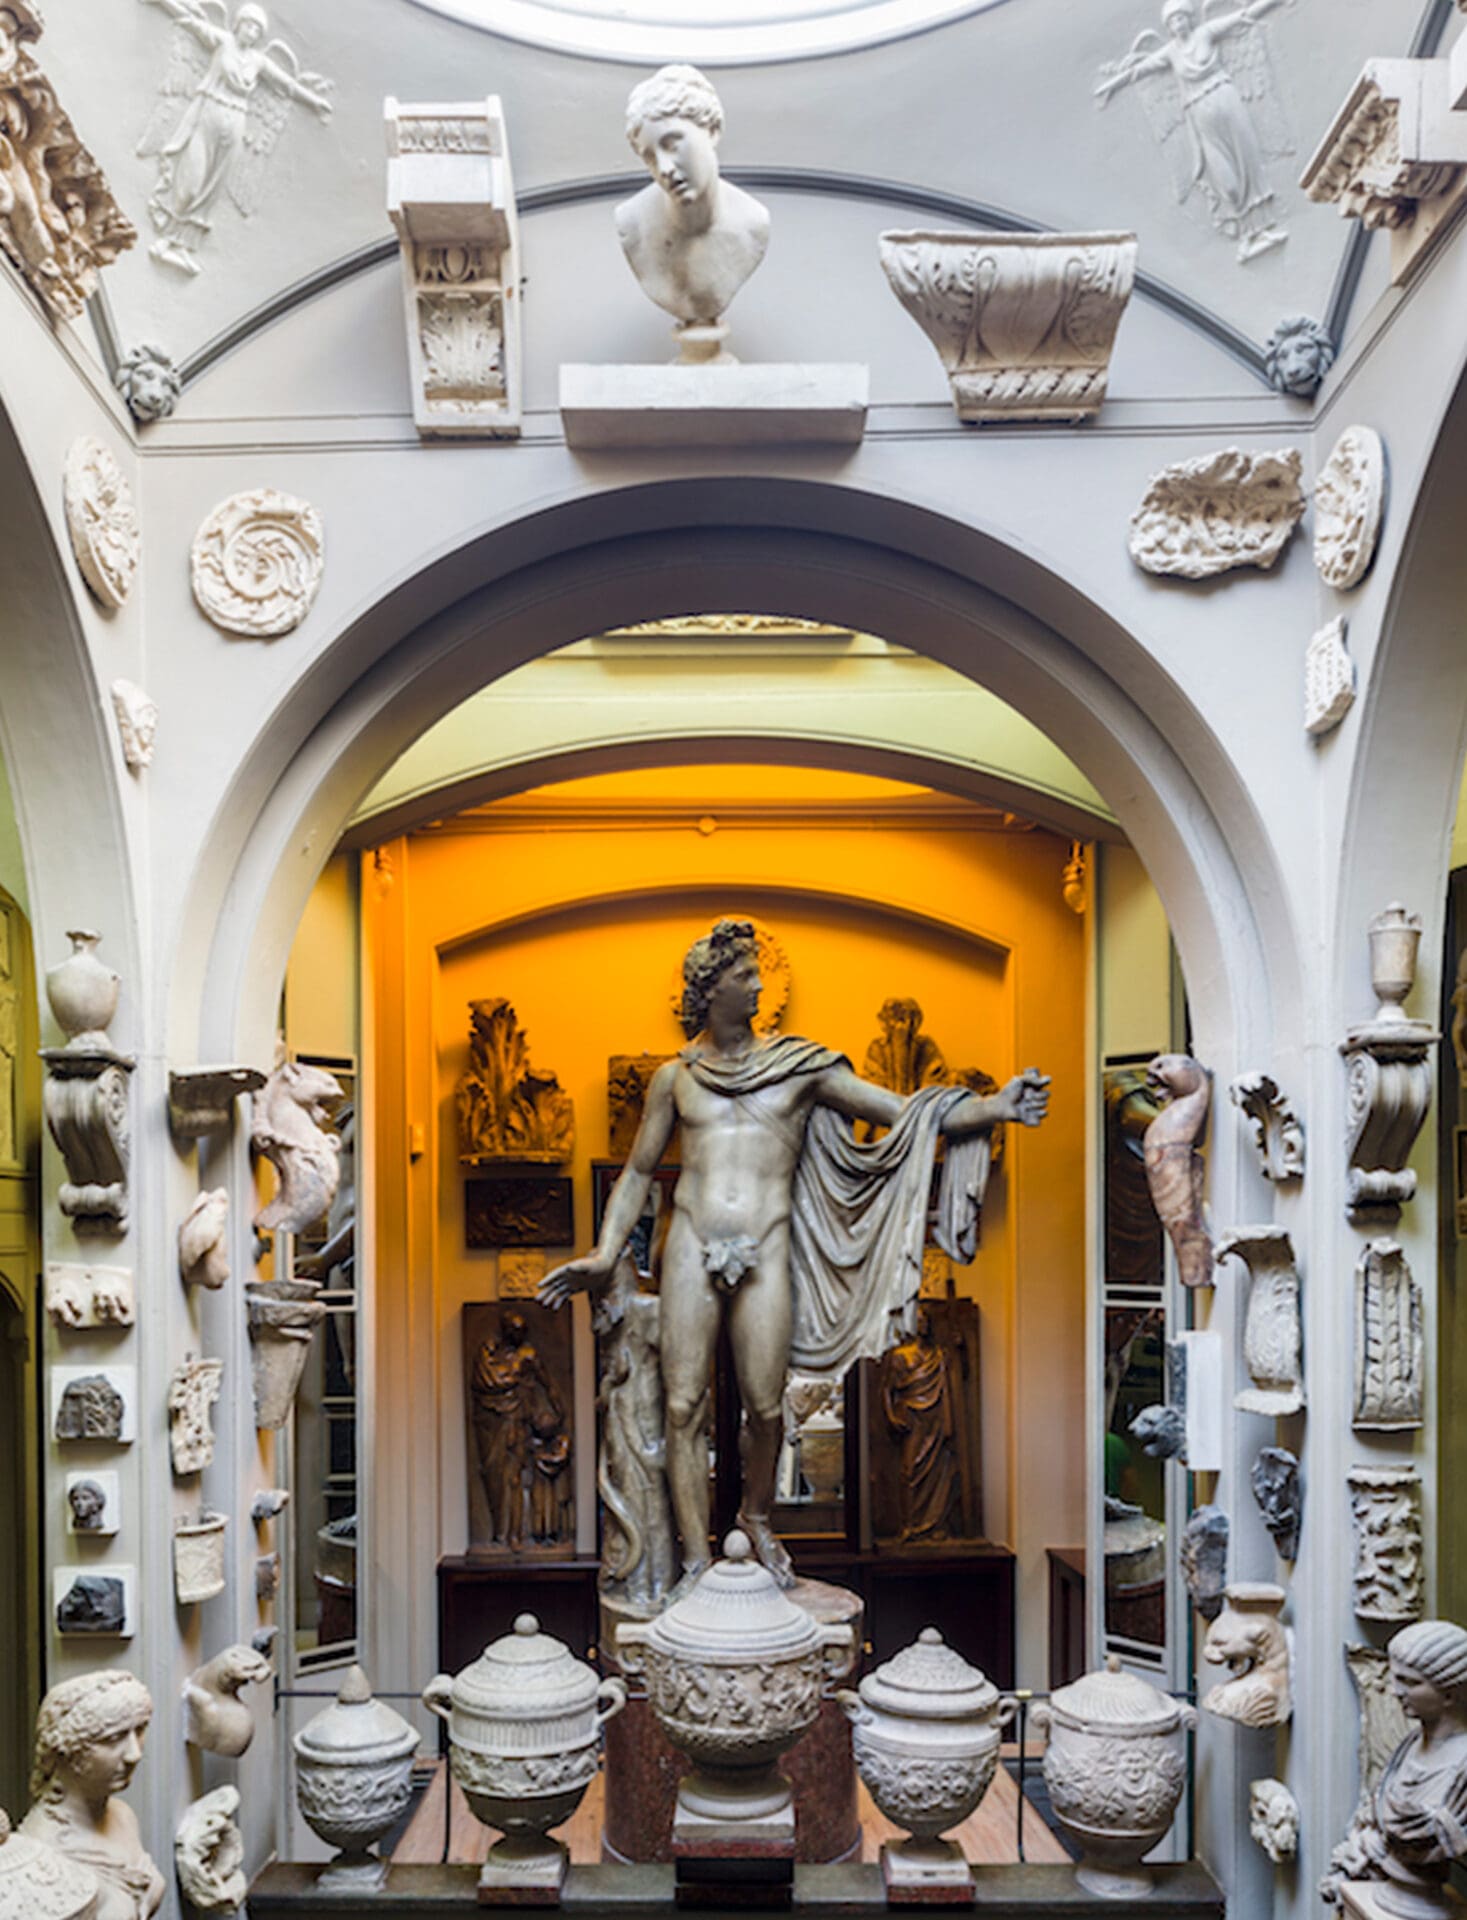 Best museums and galleries in London | Inside Sir John Soane's Museum in Holborn – the architect's former home, filled with his collection of paintings, sculpture, antiquities and architectural drawings.